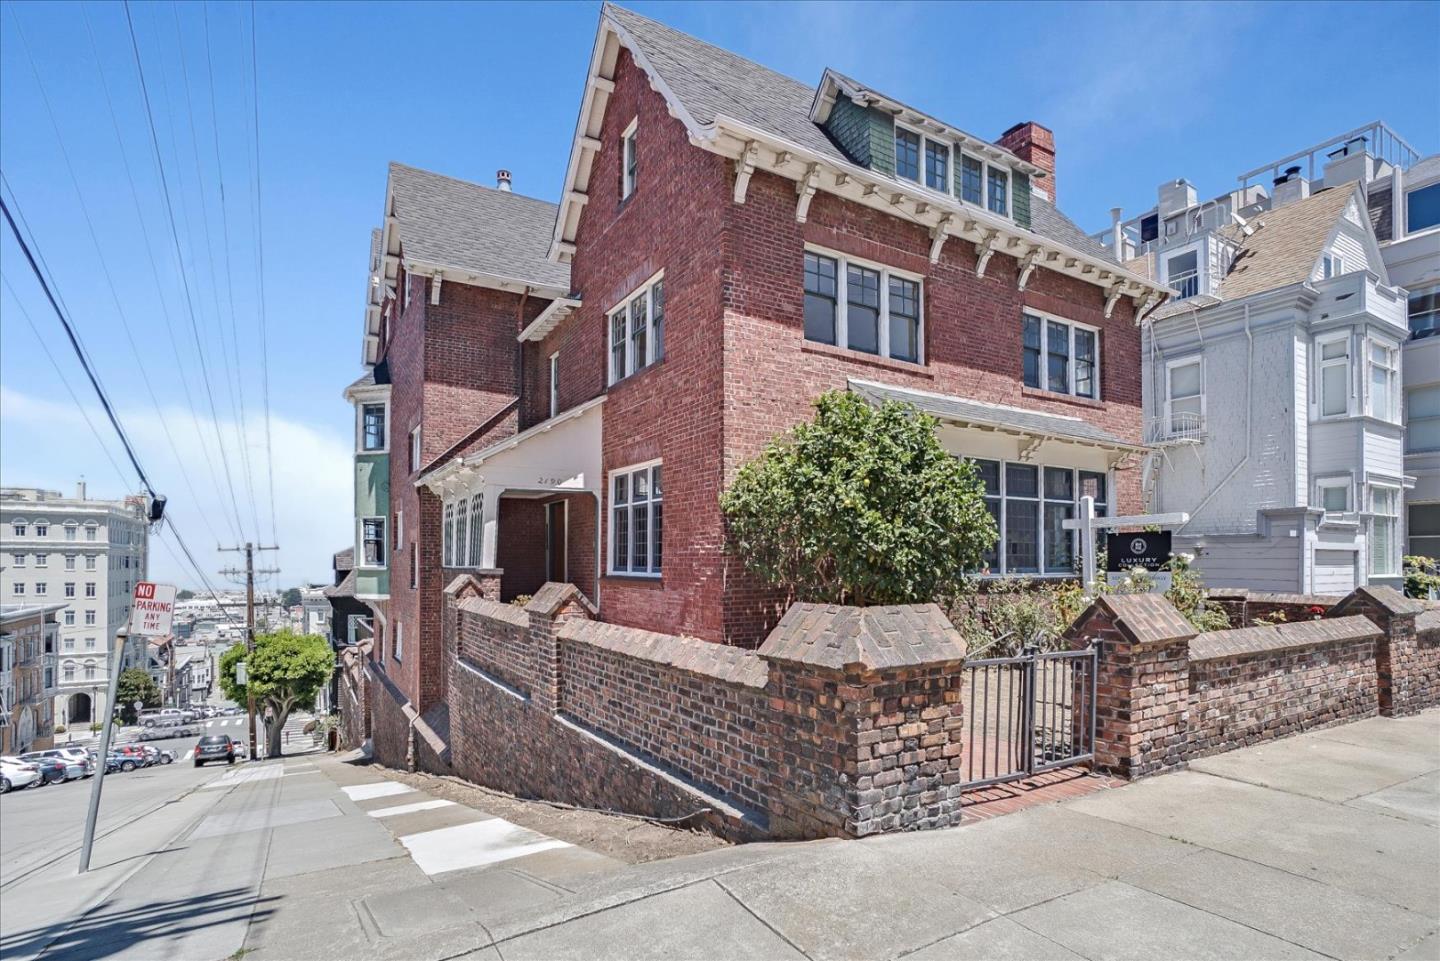 Rare opportunity to rebuild a stately Pacific Heights mansion with spectacular Golden Gate Bridge & Alcatraz views! The historic Georgian facade provides the ideal starting point for a reinterpretation and modernization of the interiors. This residence, originally designed by Edgar Mathews, is prominently situated on a large corner lot with RH-2 zoning. Architectural drawings in final stages of approval by the City of San Francisco Planning Department. An extraordinary opportunity for an end-user or developer. Plans include a home of nearly 10,000 square feet with four levels of extraordinary living spaces highlighted by expanses of glass, open-plan kitchens, vast outdoor entertaining space, wine cellar, elevator and 7 car garage. Ideally located walking distance to Fillmore, Union and Chestnut Street's shops and restaurants, as well as Lafayette Park and Alta Plaza Park.